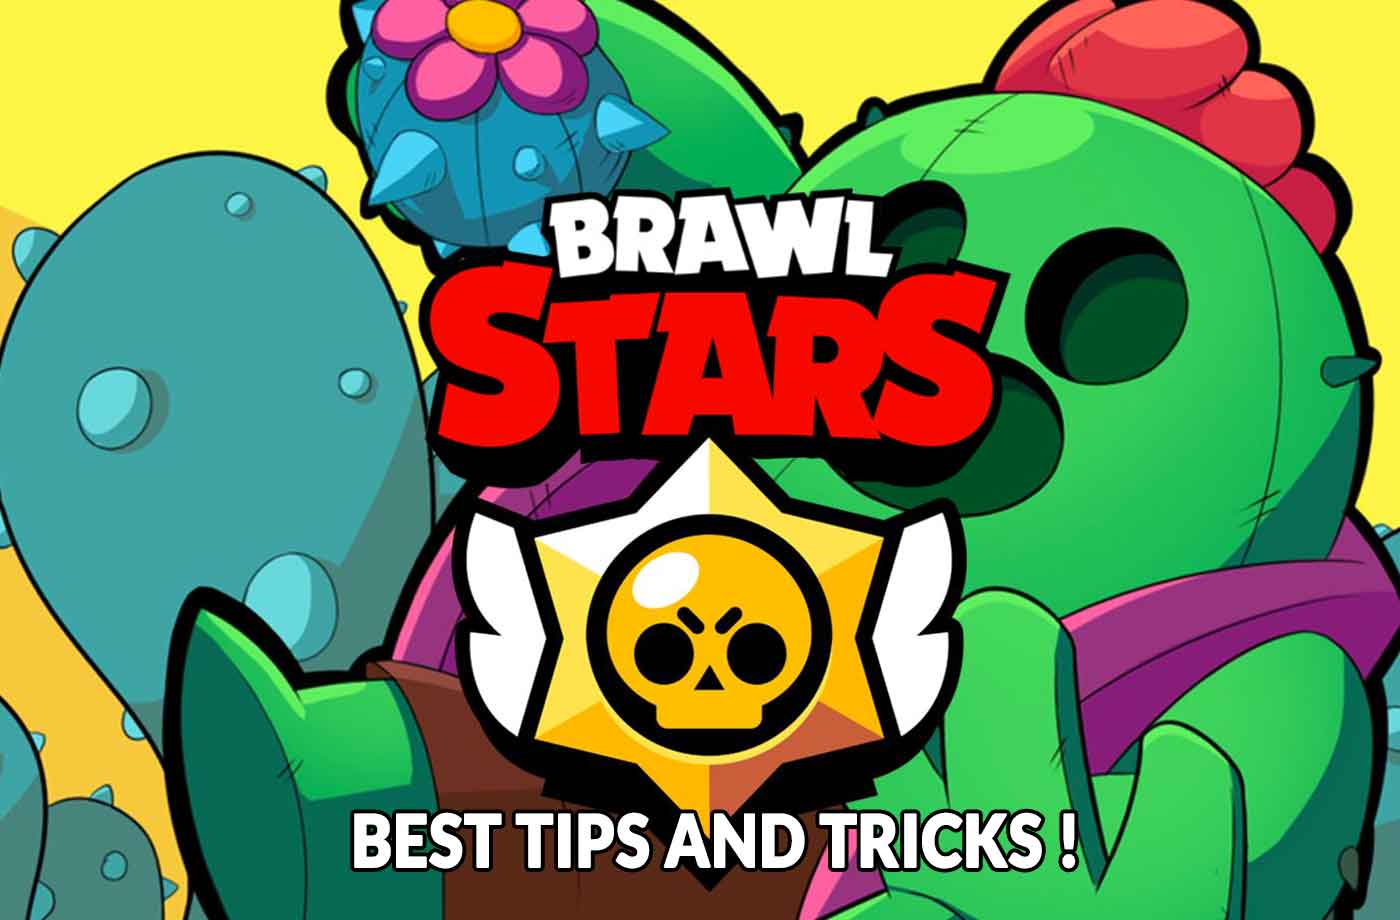 Guide Brawl Stars Tips And Hints To Understand The New Game Of Supercell Kill The Game - comment mettre un compte brawl star sur pc